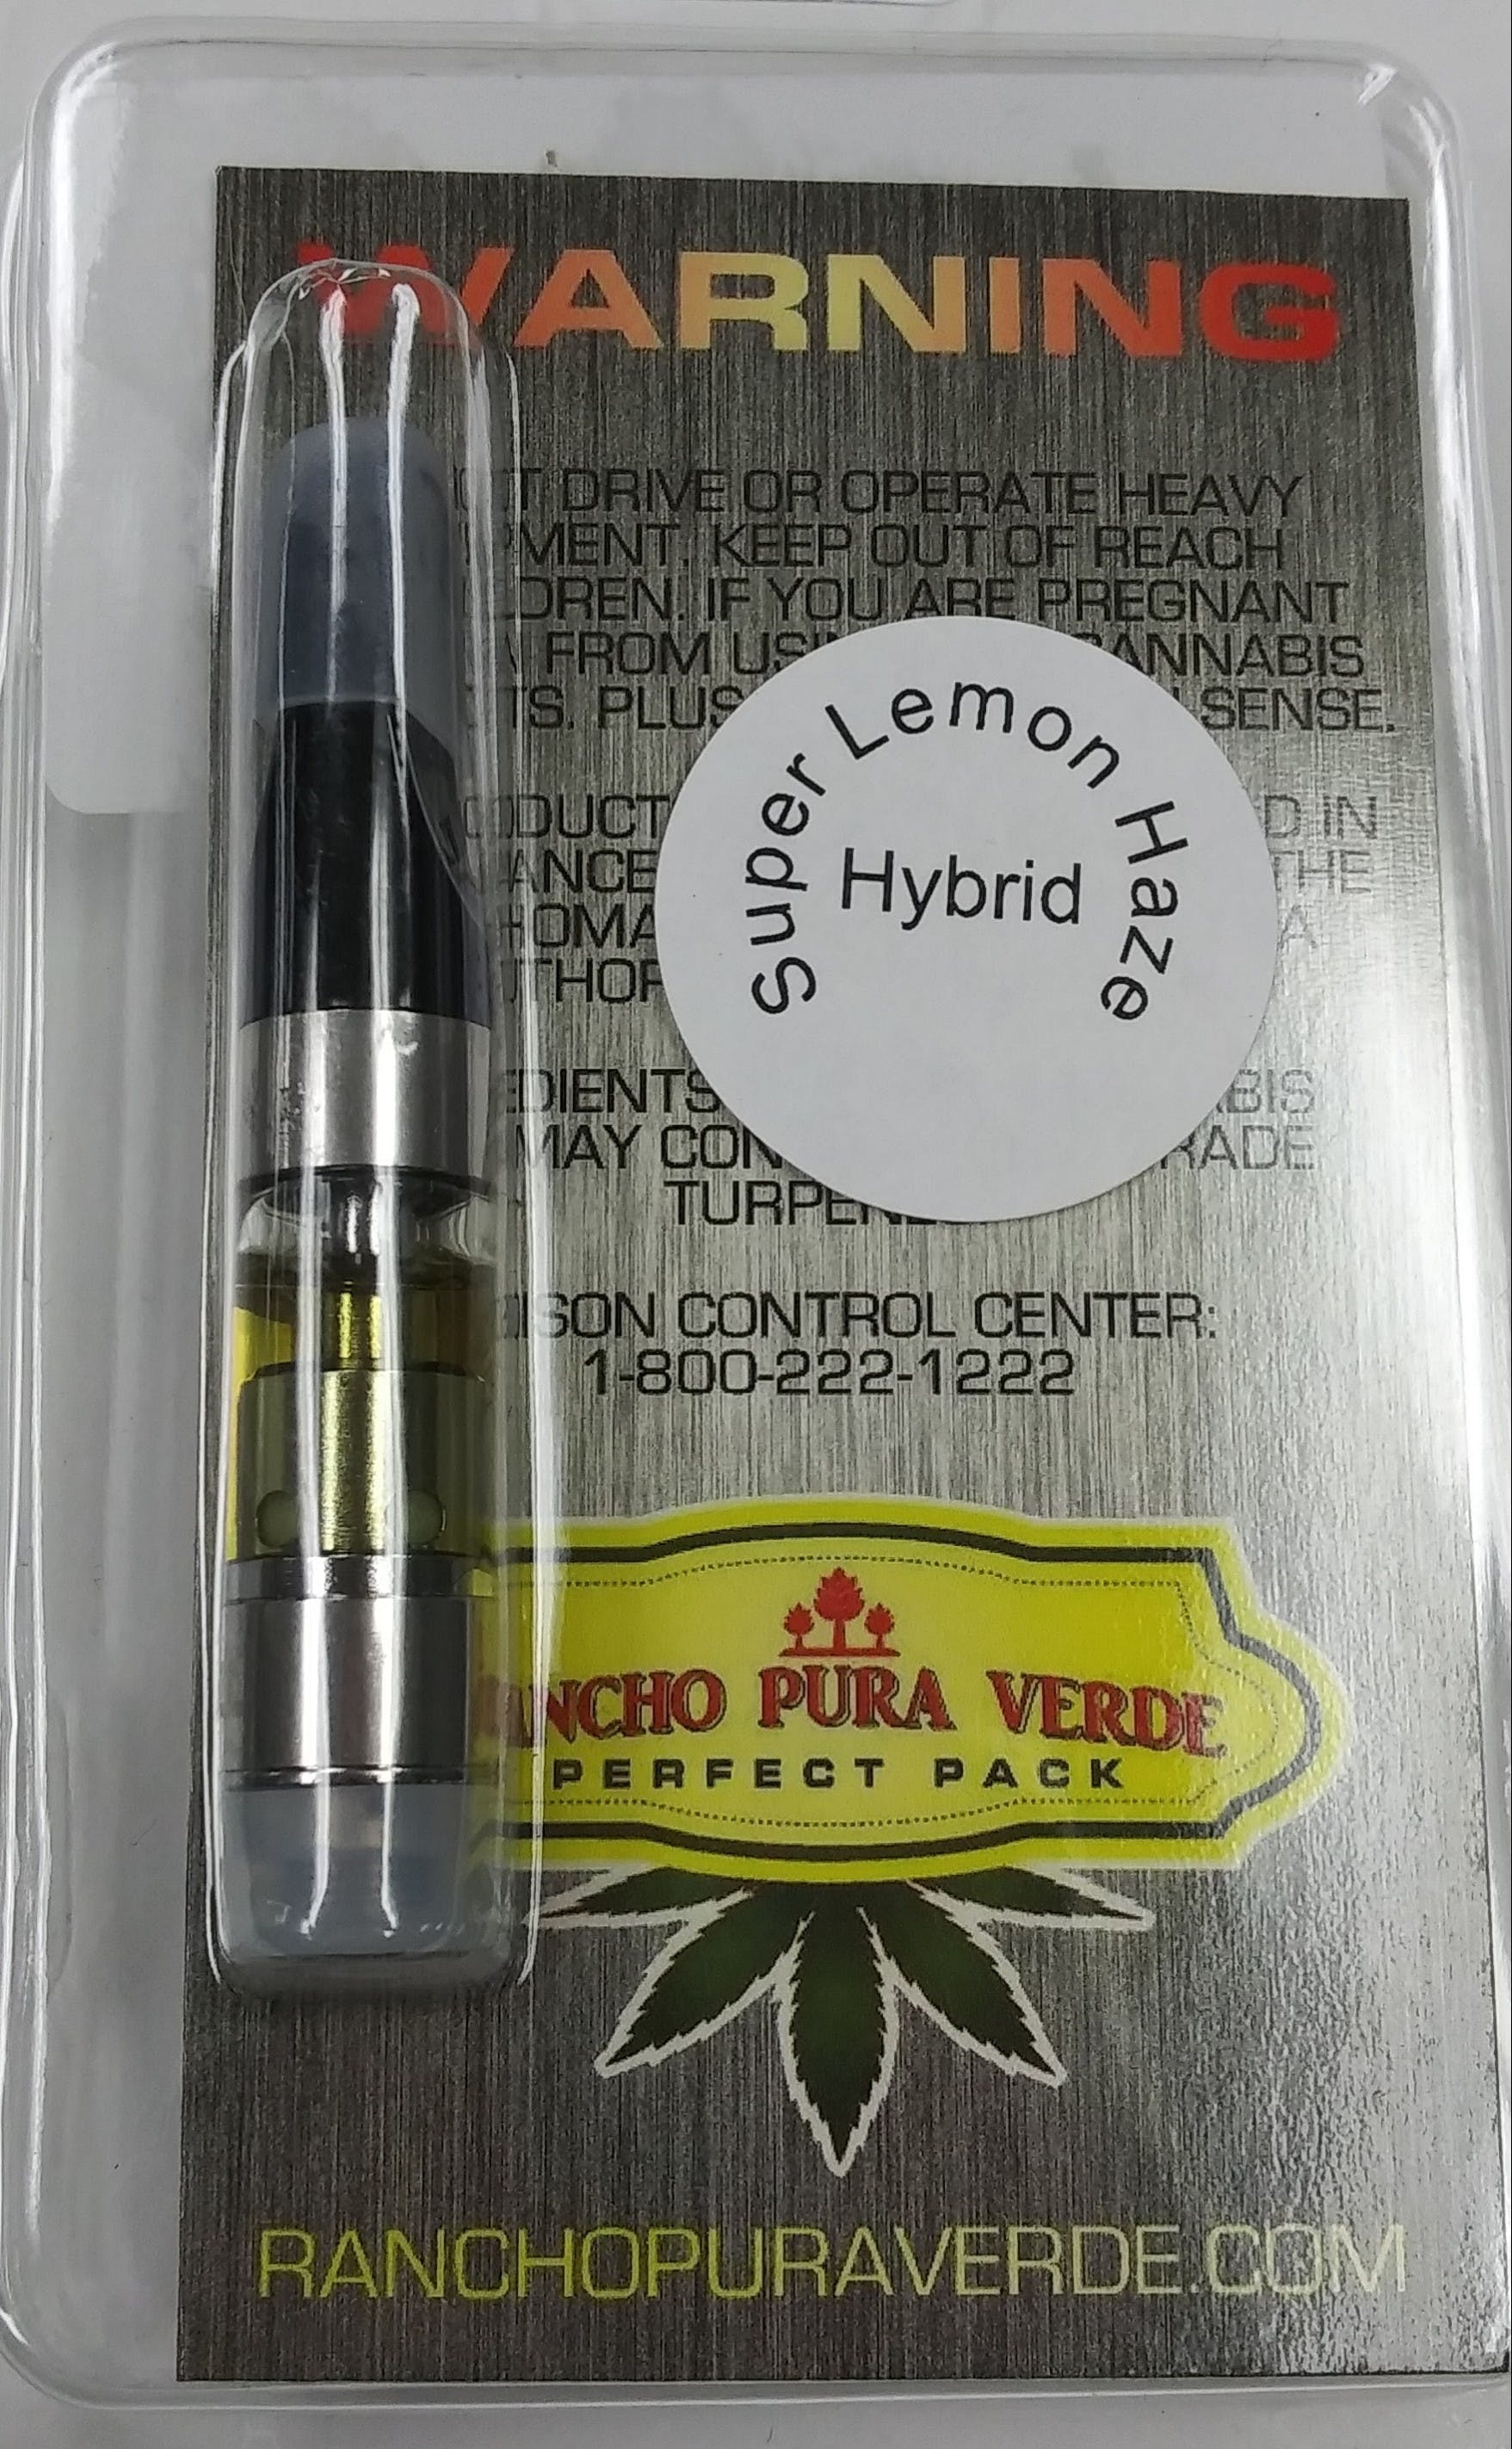 concentrate-500mg-cartridge-92-25